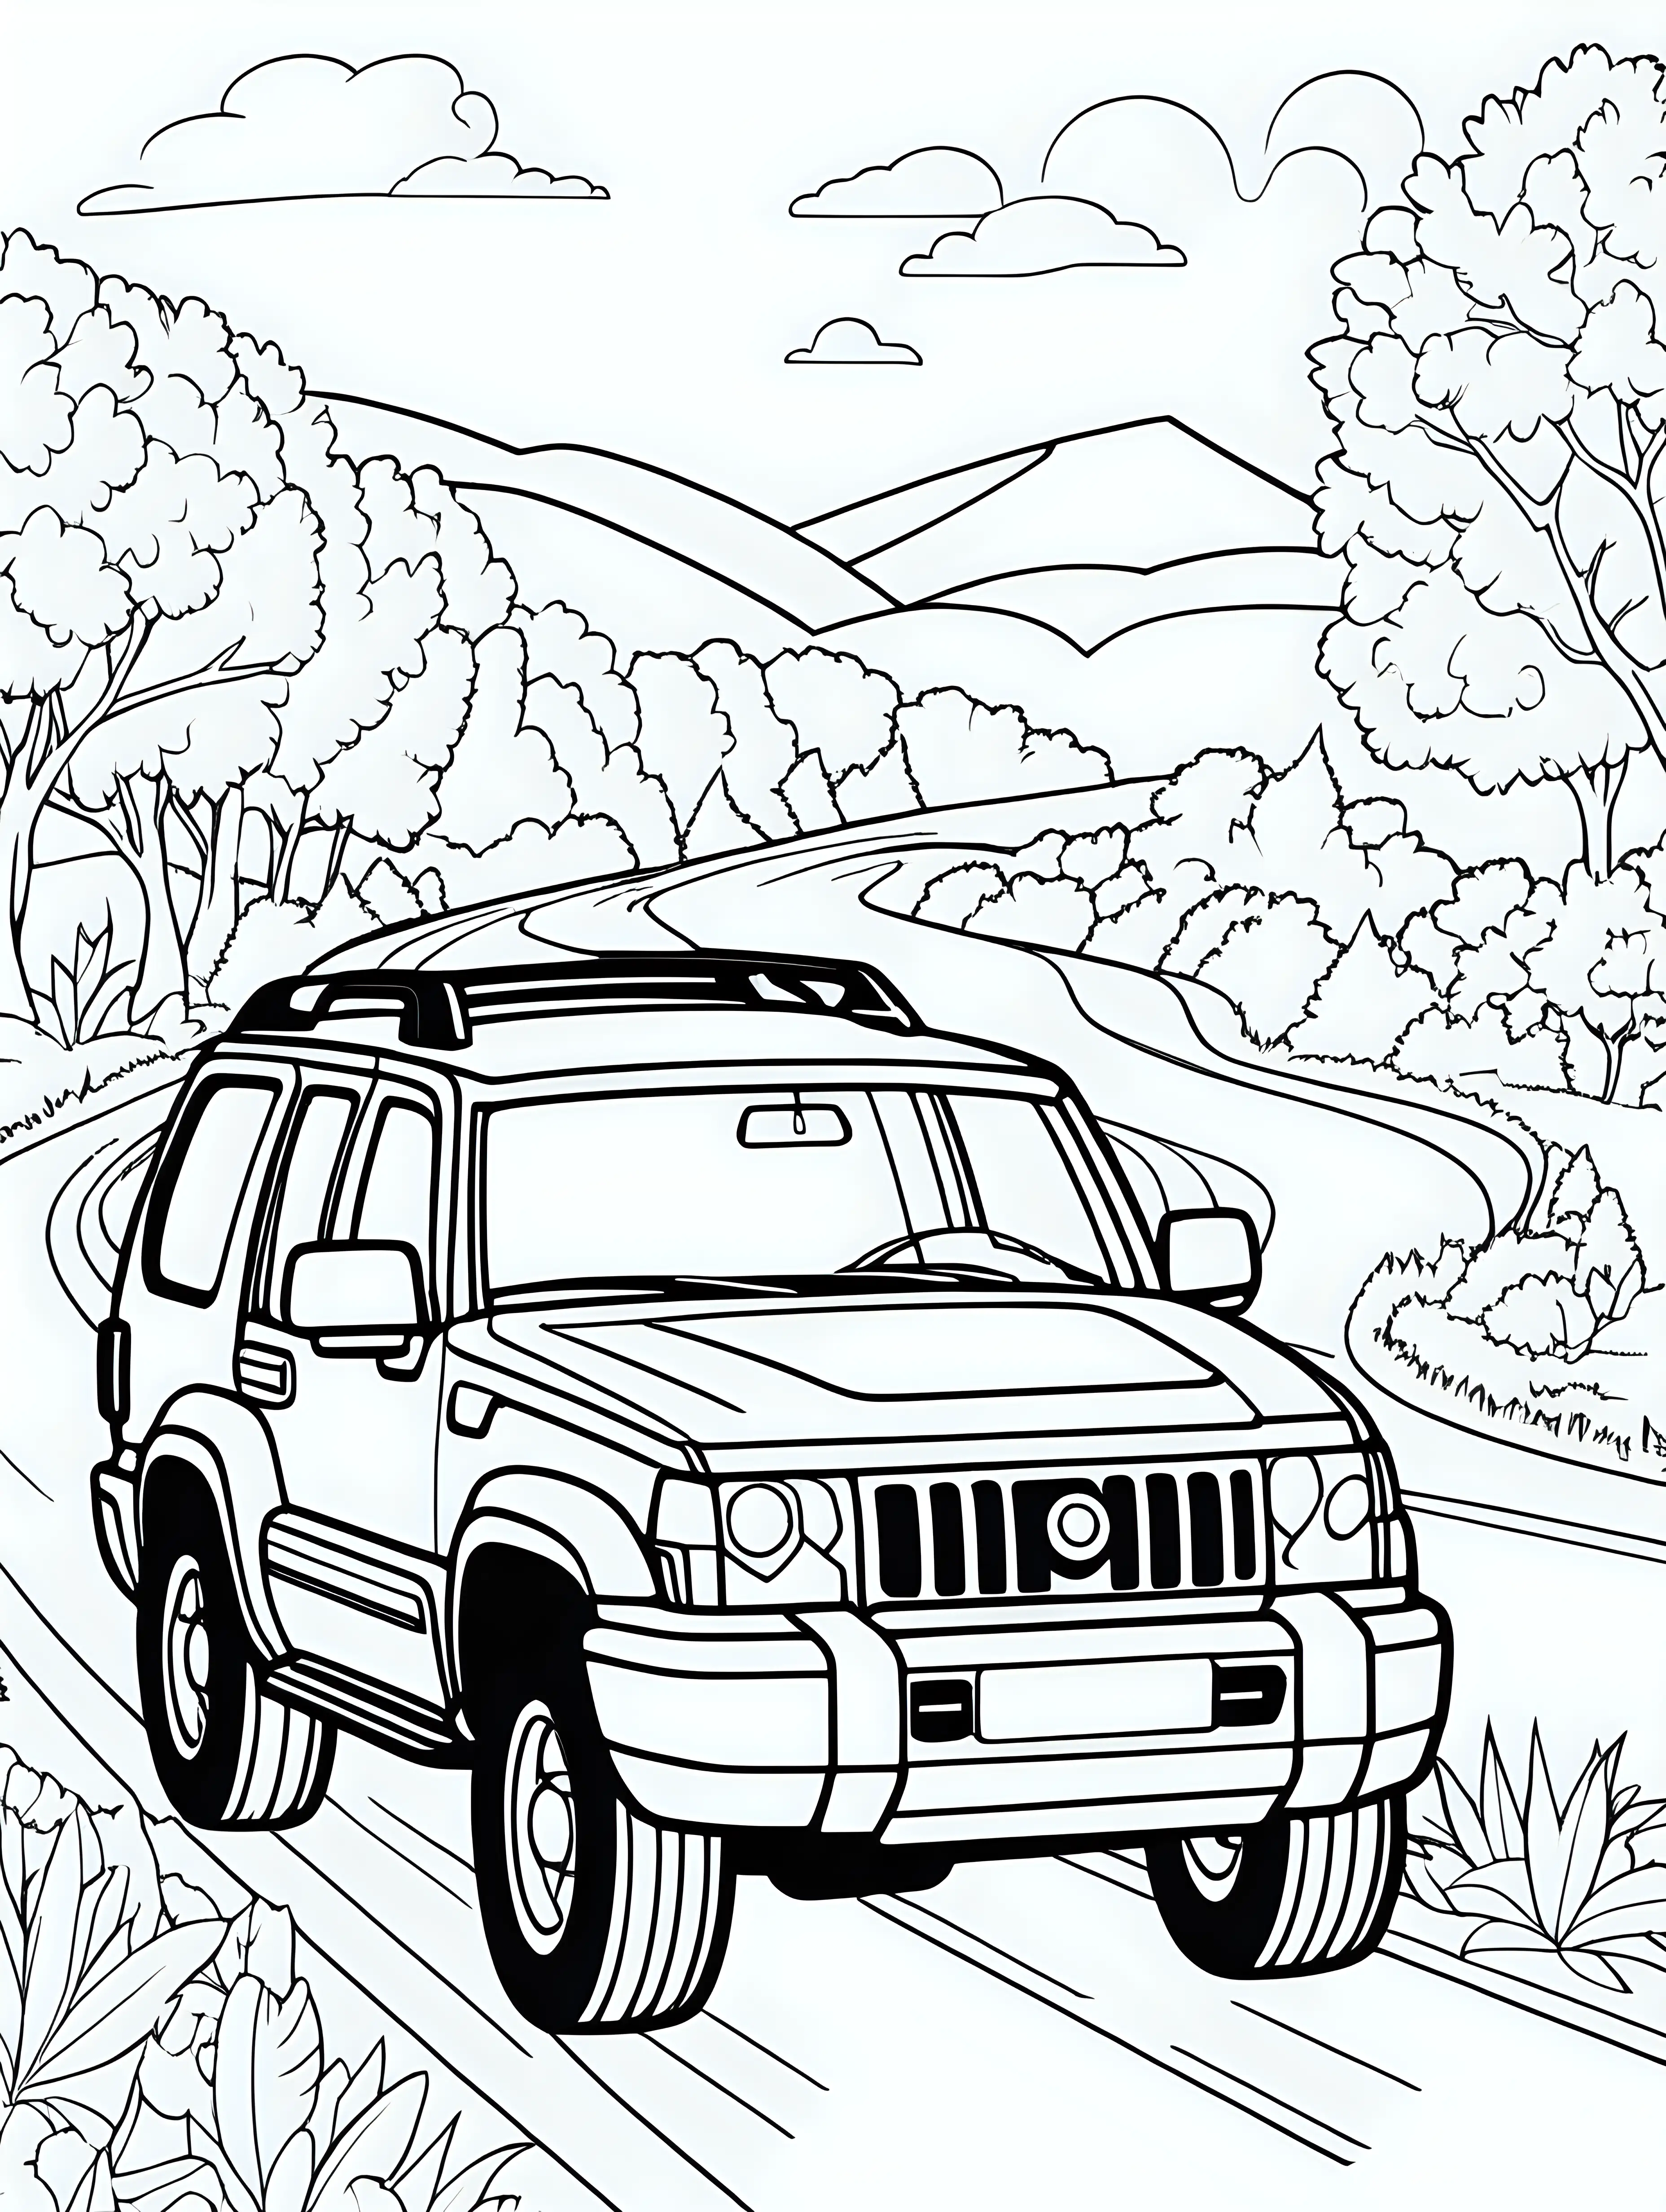 SUV Car Coloring Page for Kids OnRoad Adventure